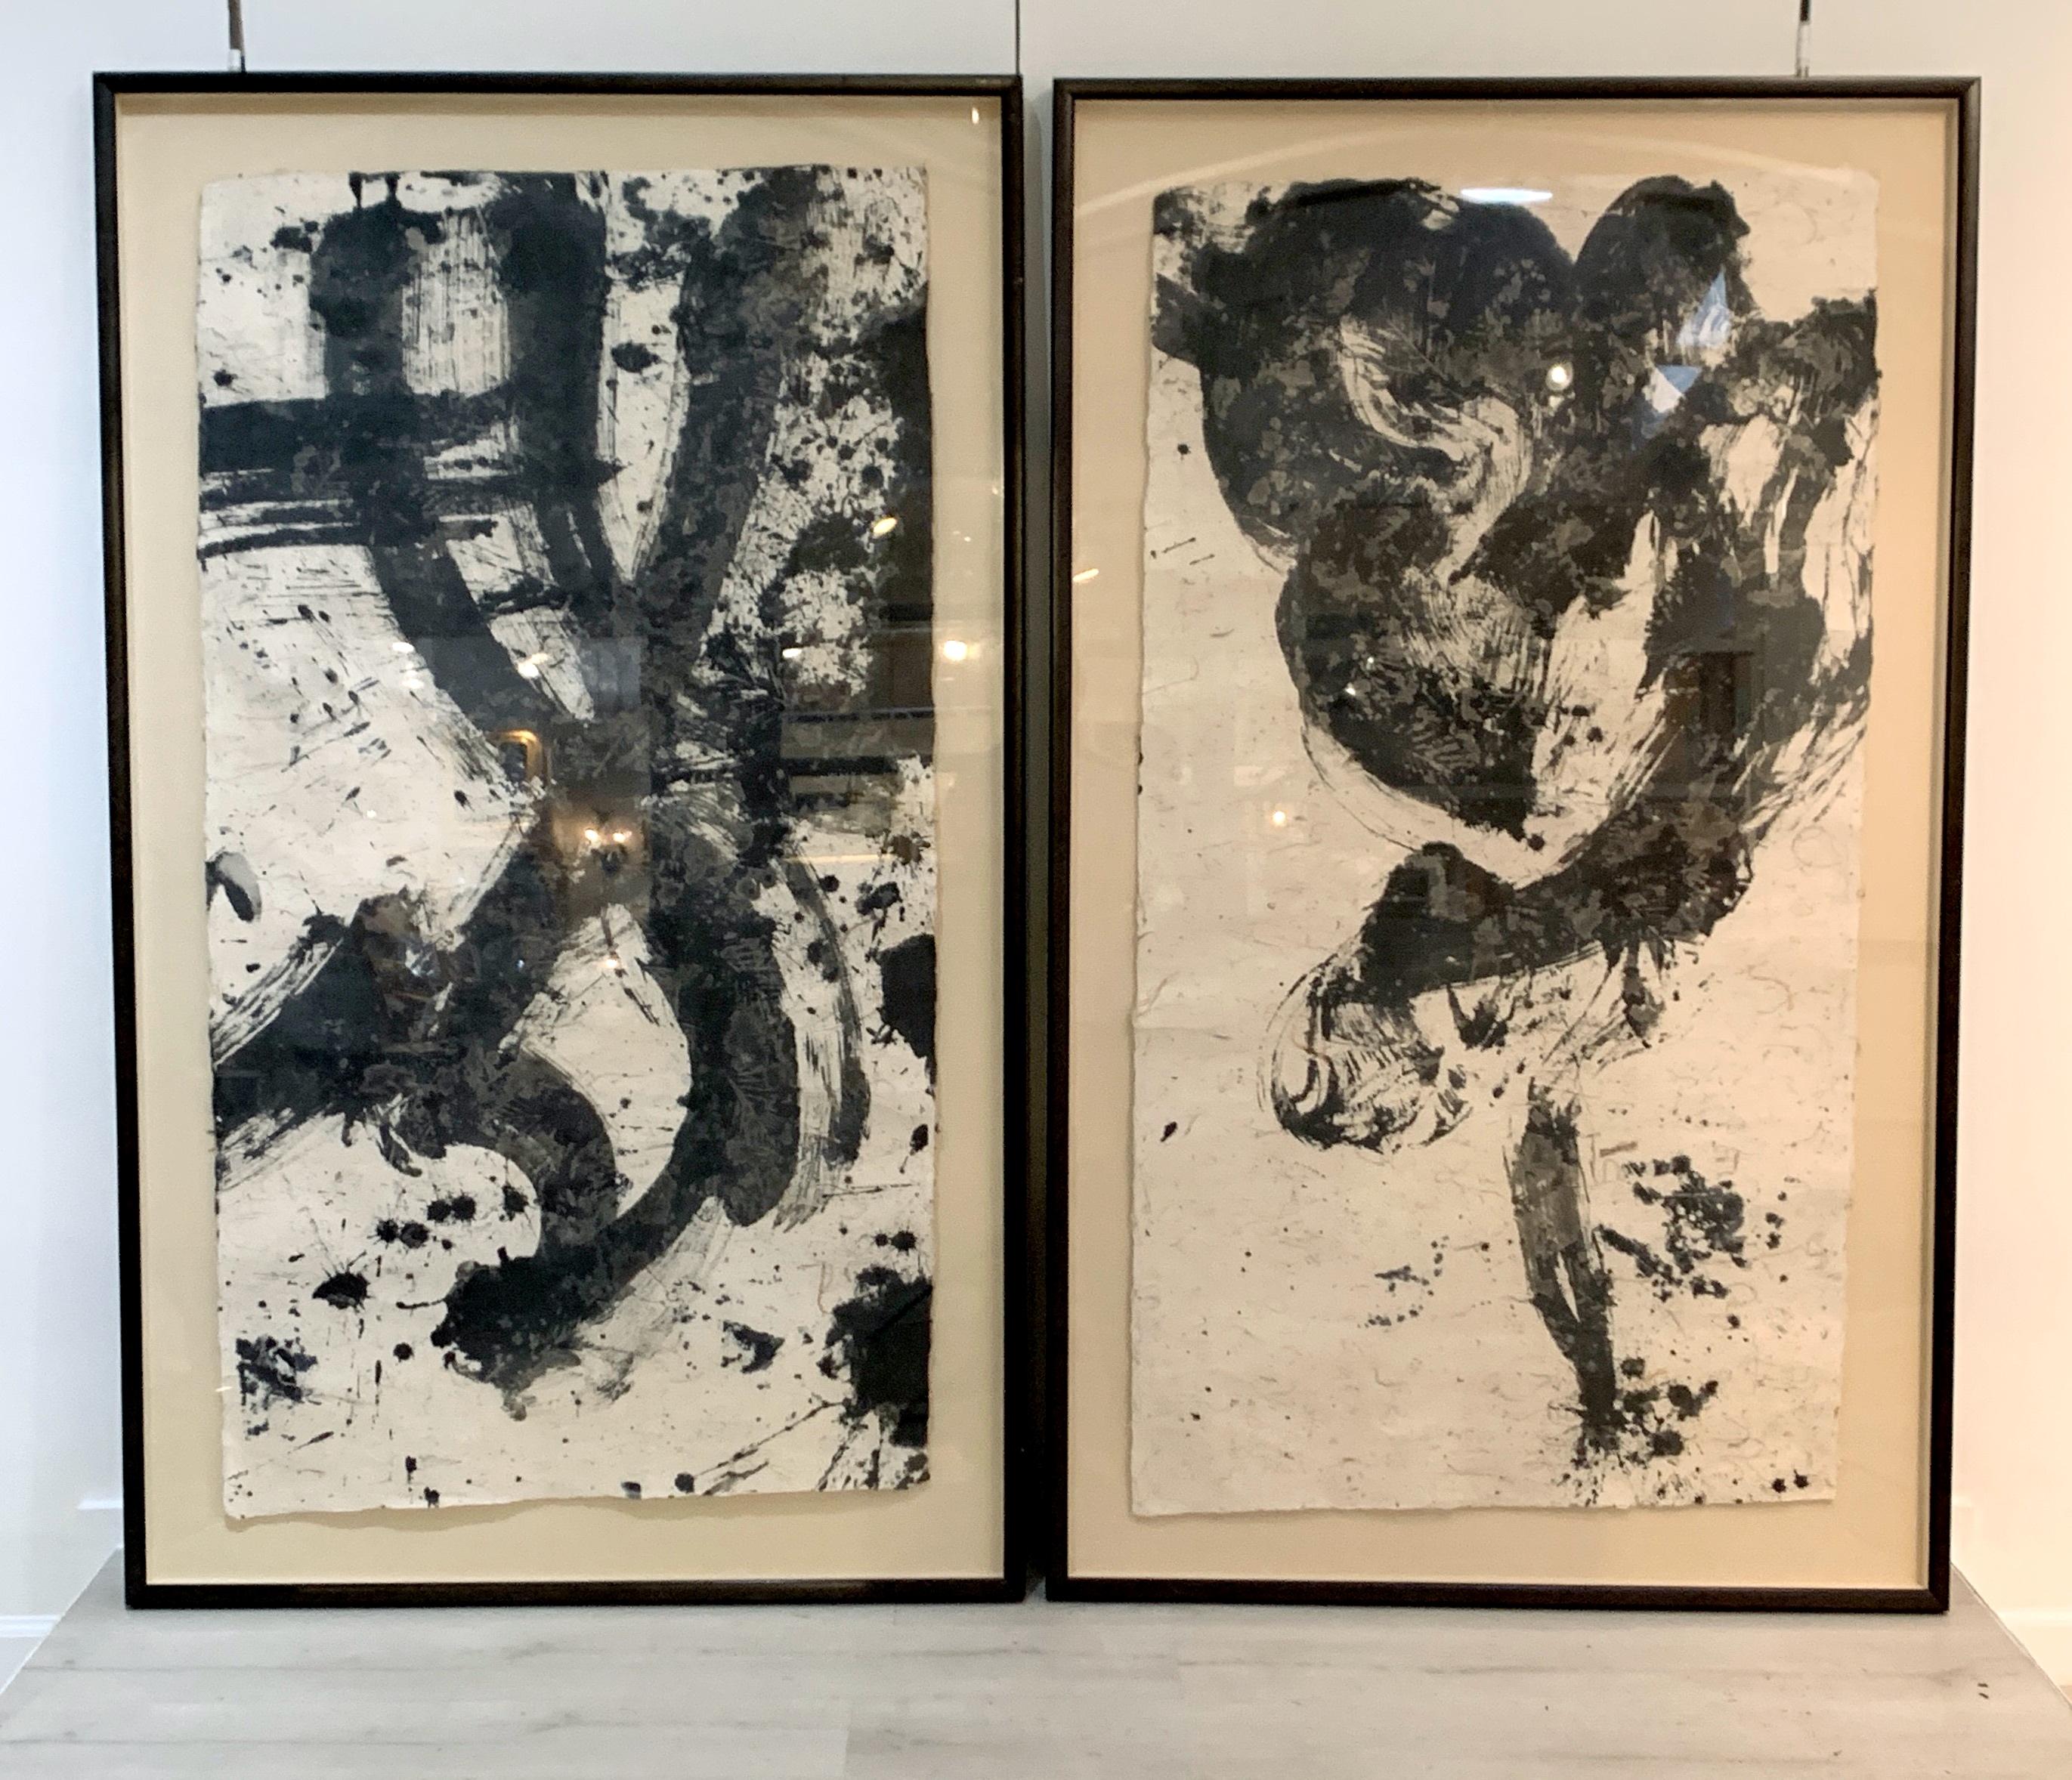 A large and powerful pair of Japanese calligraphic works, mid 20th century, Japan. One reading 